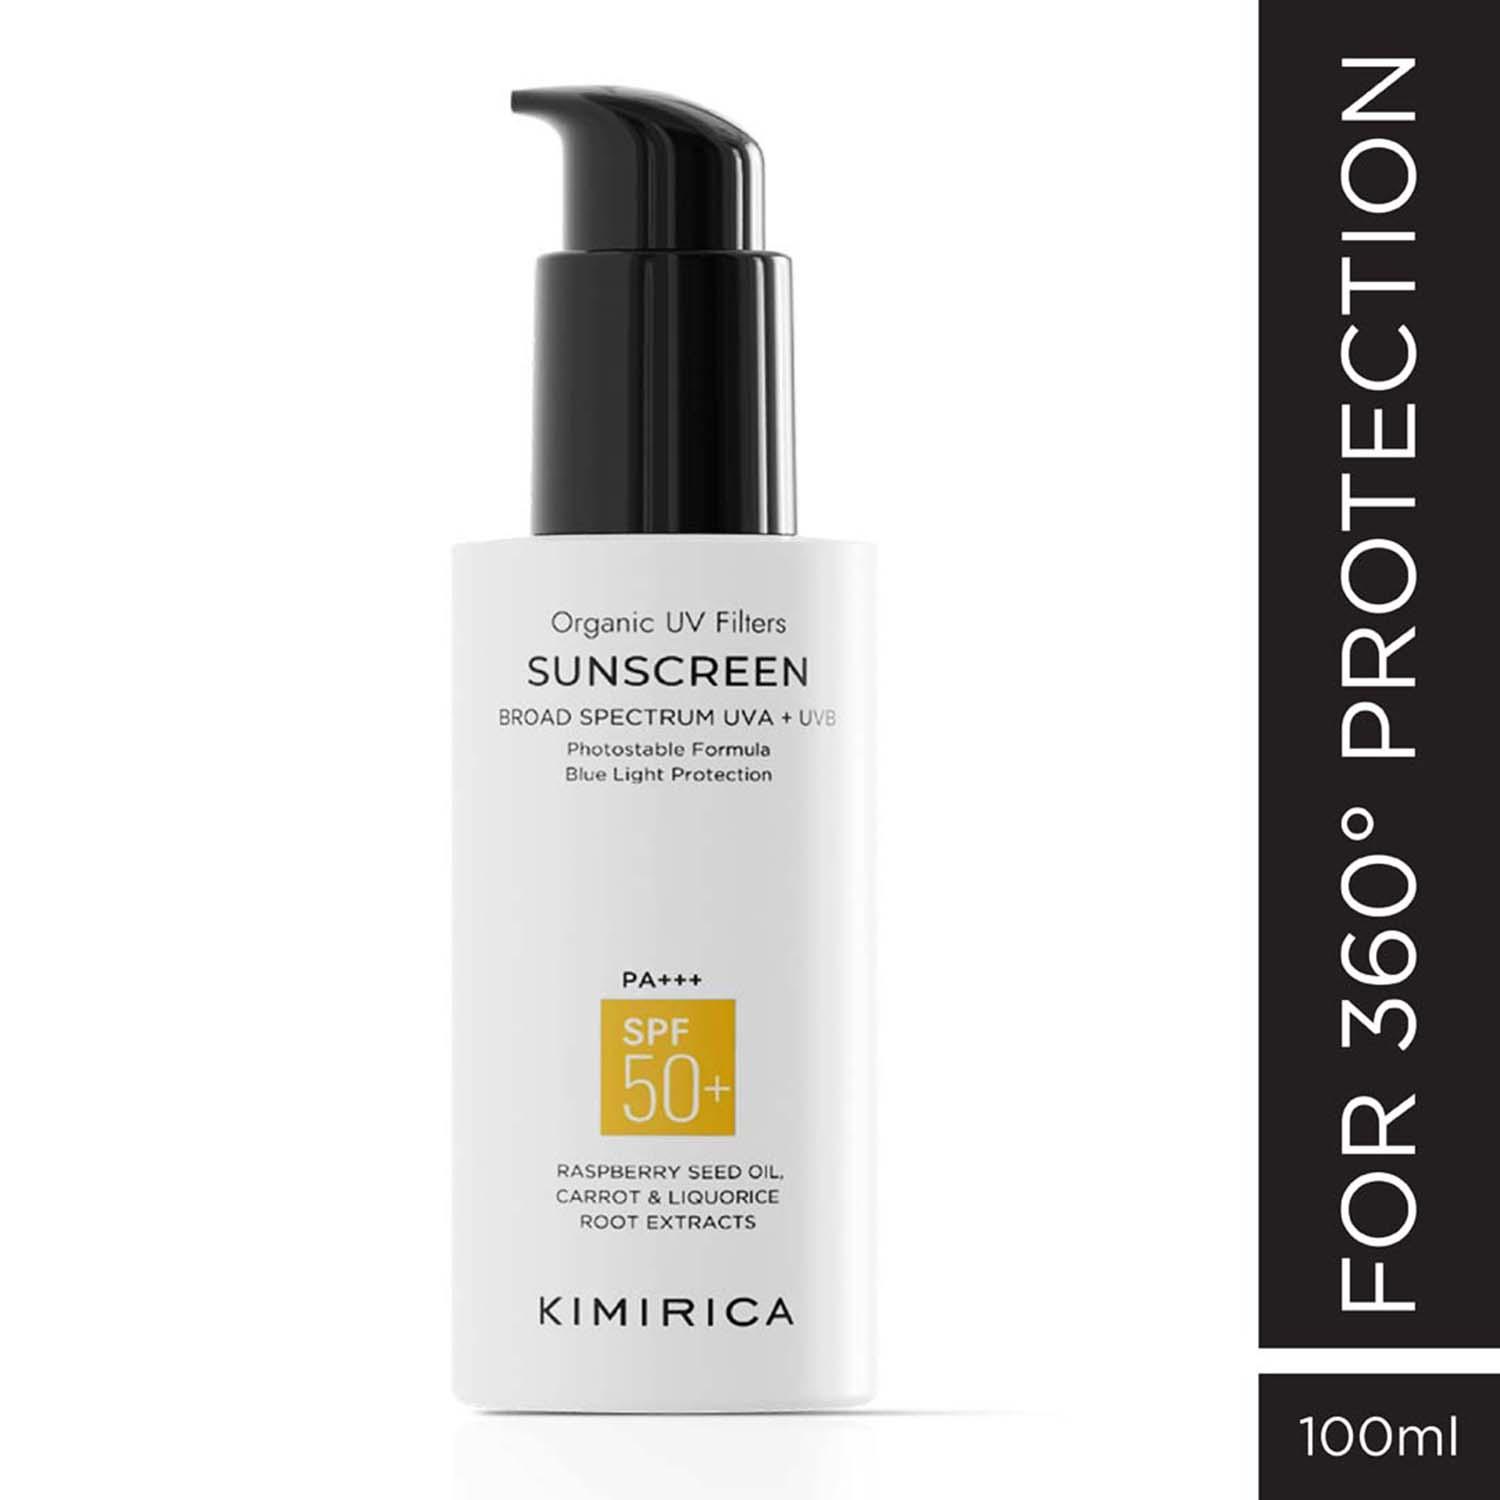 Kimirica Multi Protection Sunscreen SPF 50 PA+++ for UVA/B Protection with Liquorice Extract (100 g)